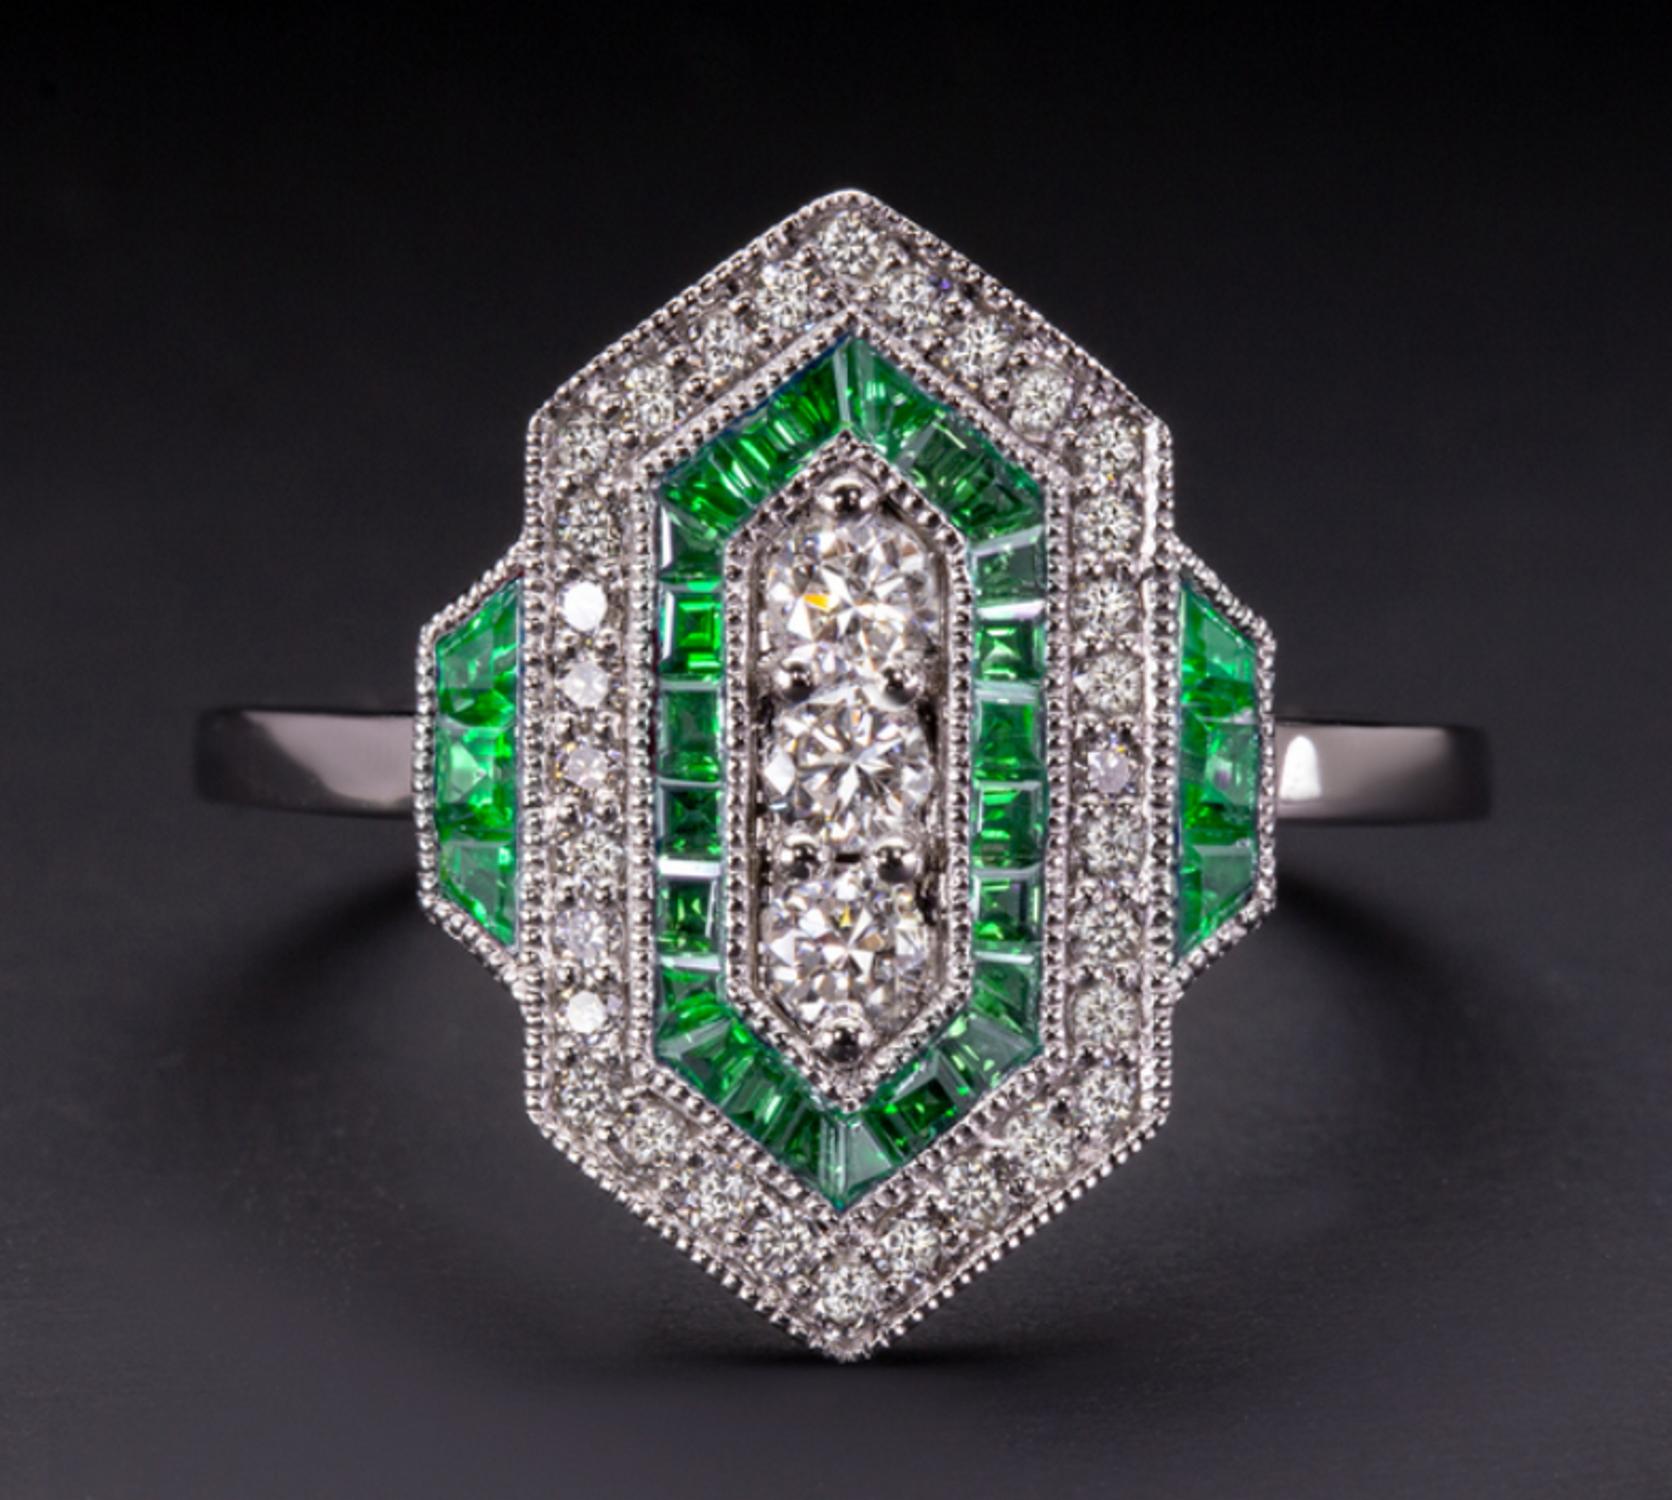 Art deco style emerald diamond ring

The emeralds are cut and set with exceptional craftsmanship. Each emerald is individually cut to fit in the channel with zero gaps. This is a highly skilled and labor intensive process that truly makes this ring